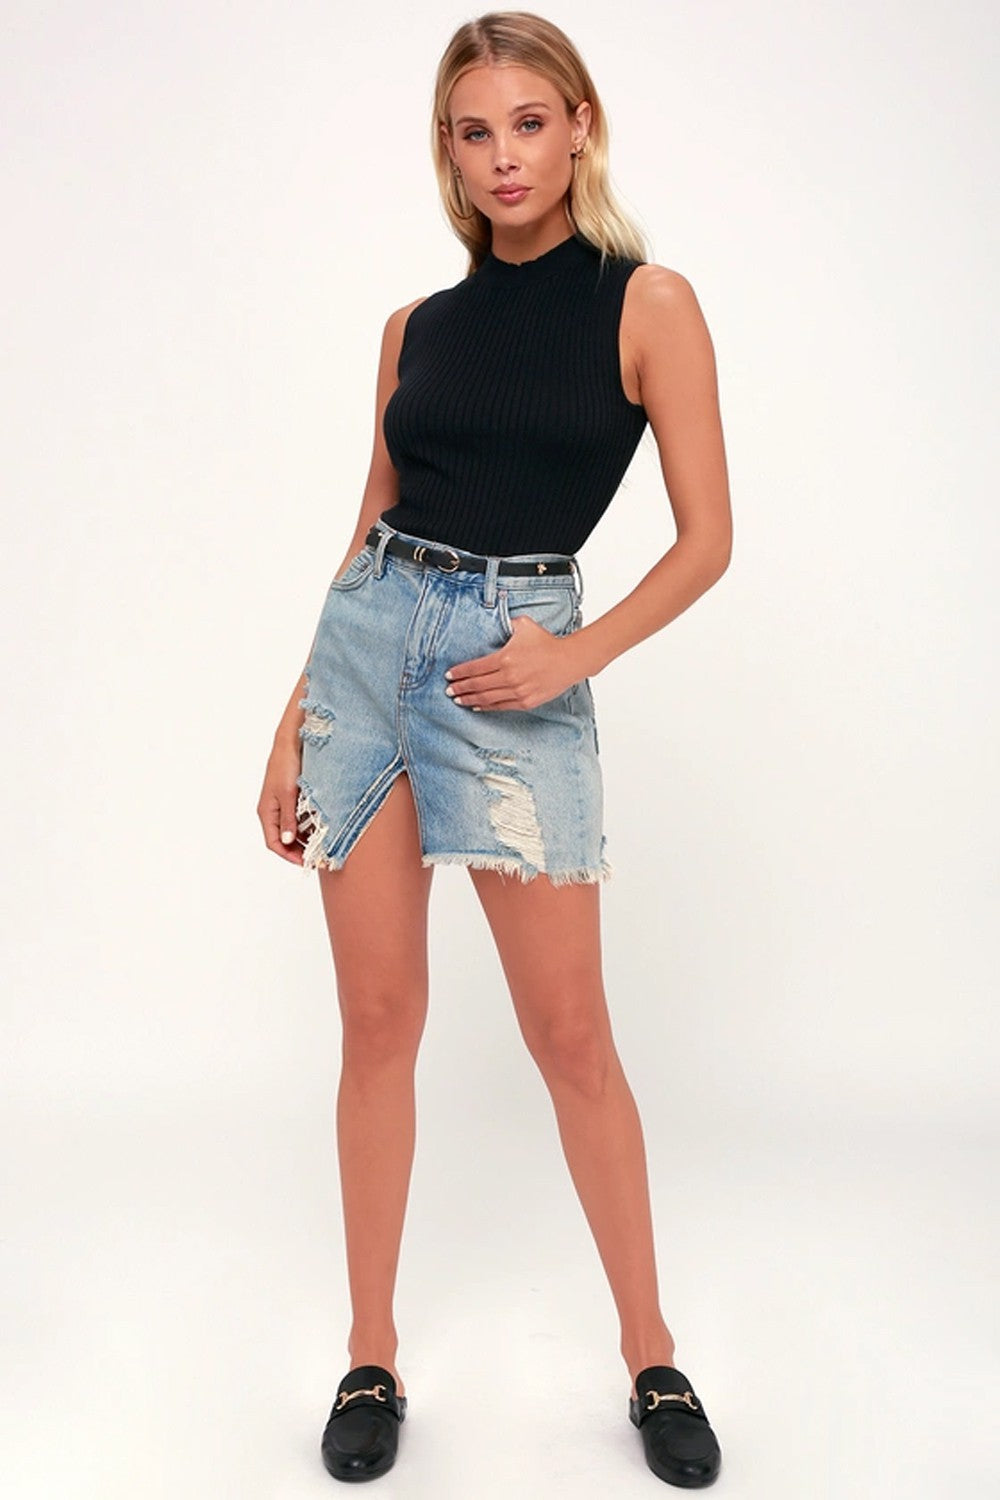 Casual Sleeveless Solid Black Cotton Blend Crop Top!!